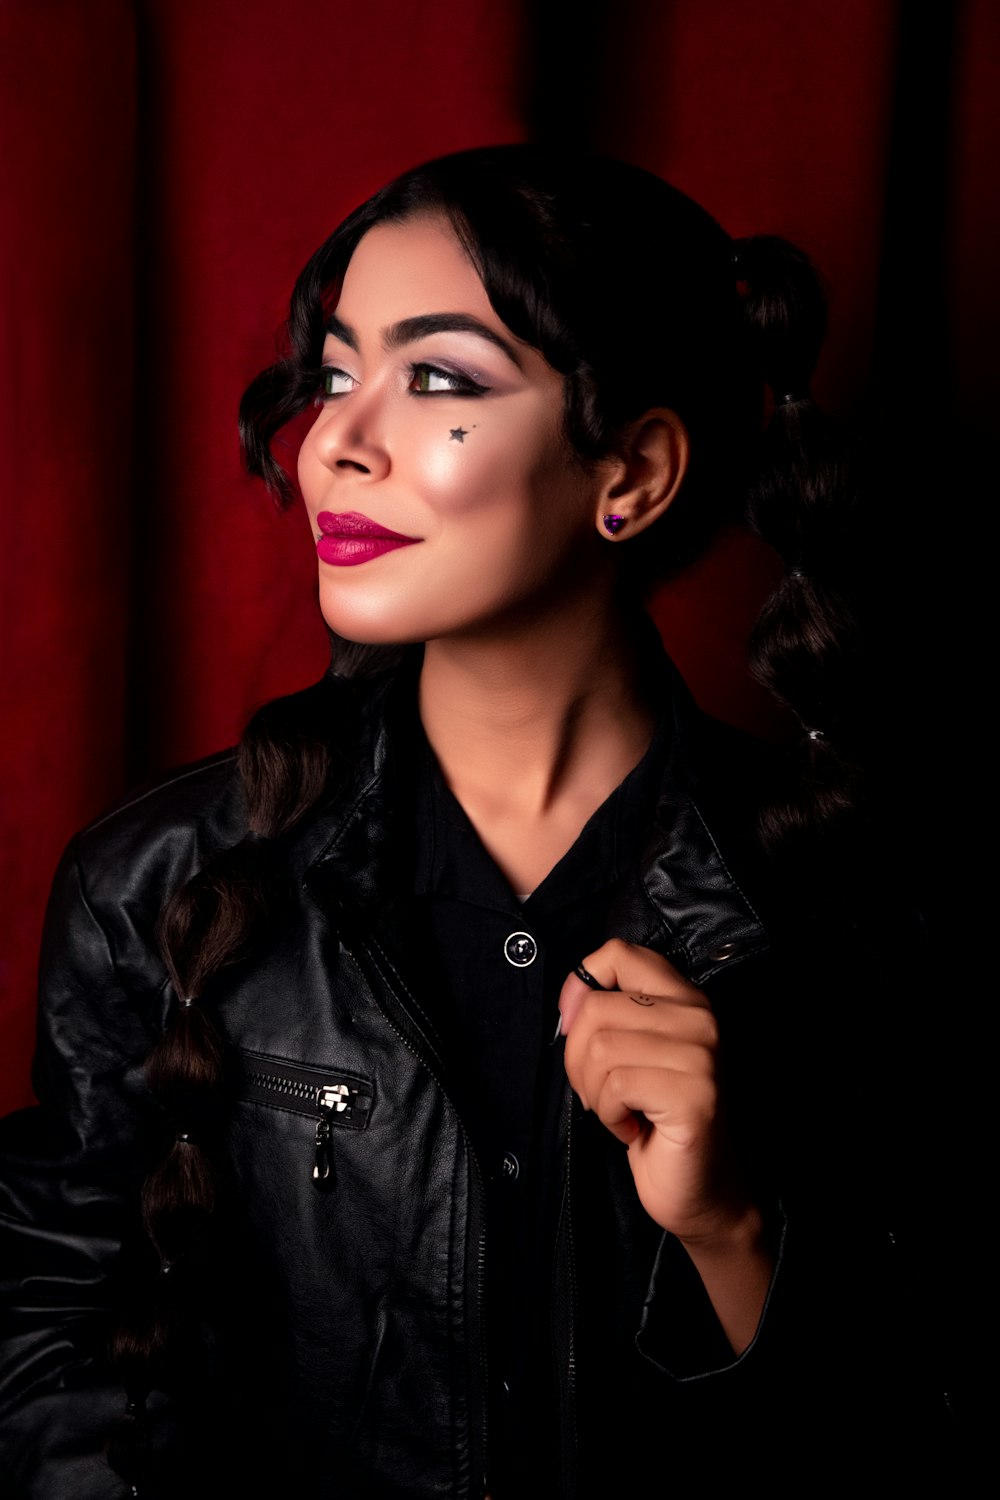 a woman wearing a black leather jacket and red lipstick